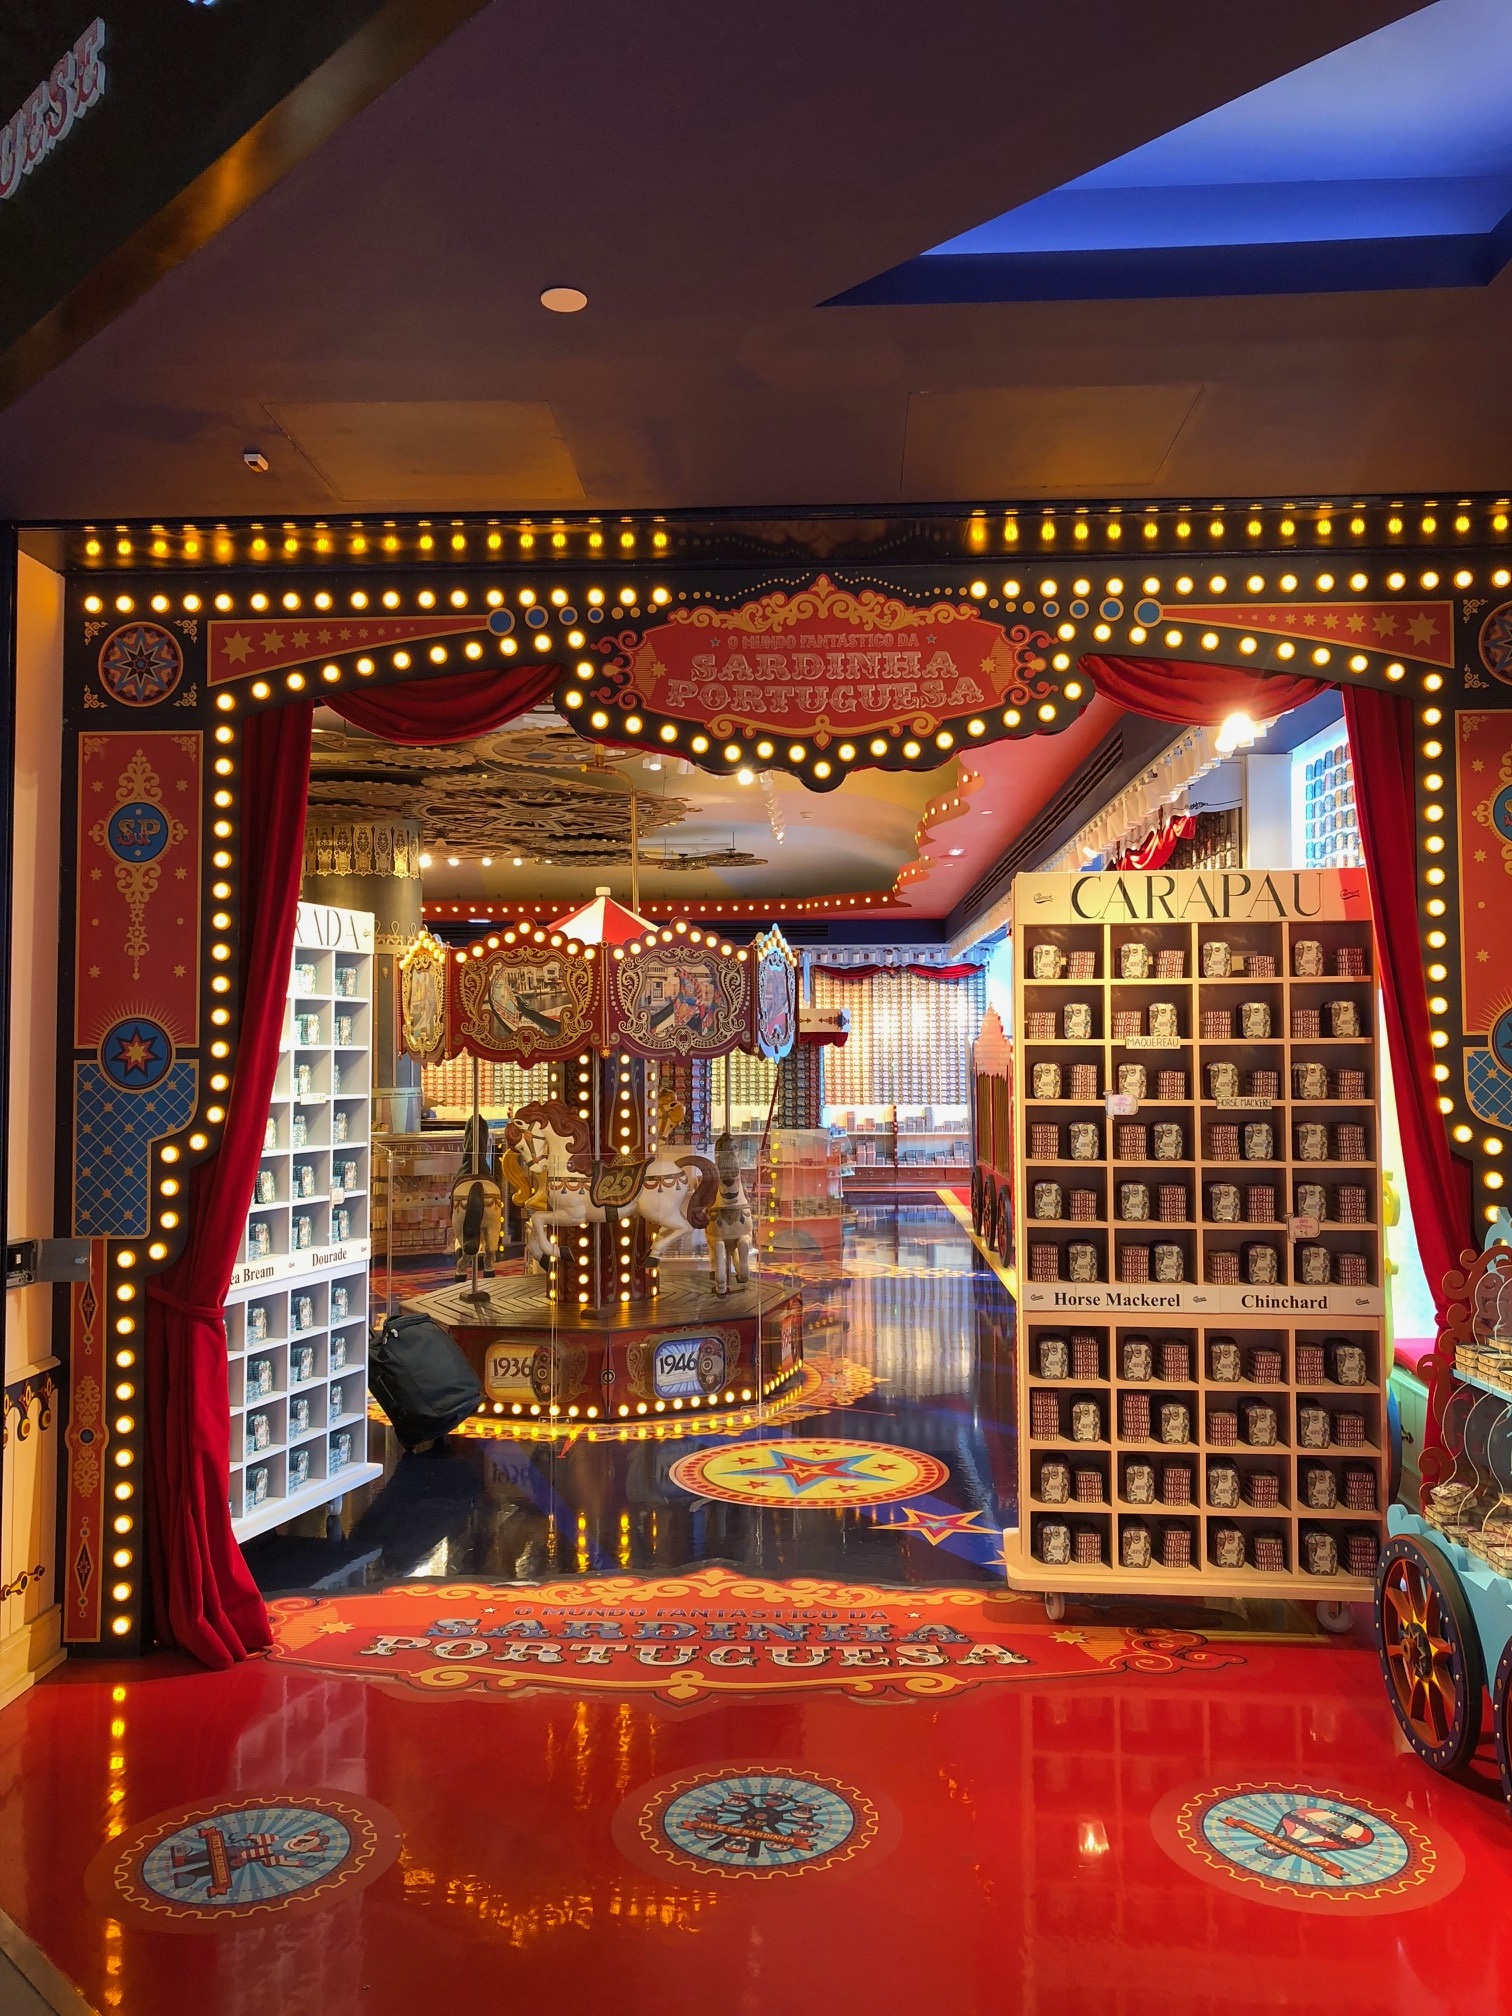 Photograph of Sardine Store from Lisbon Airport with Carousel